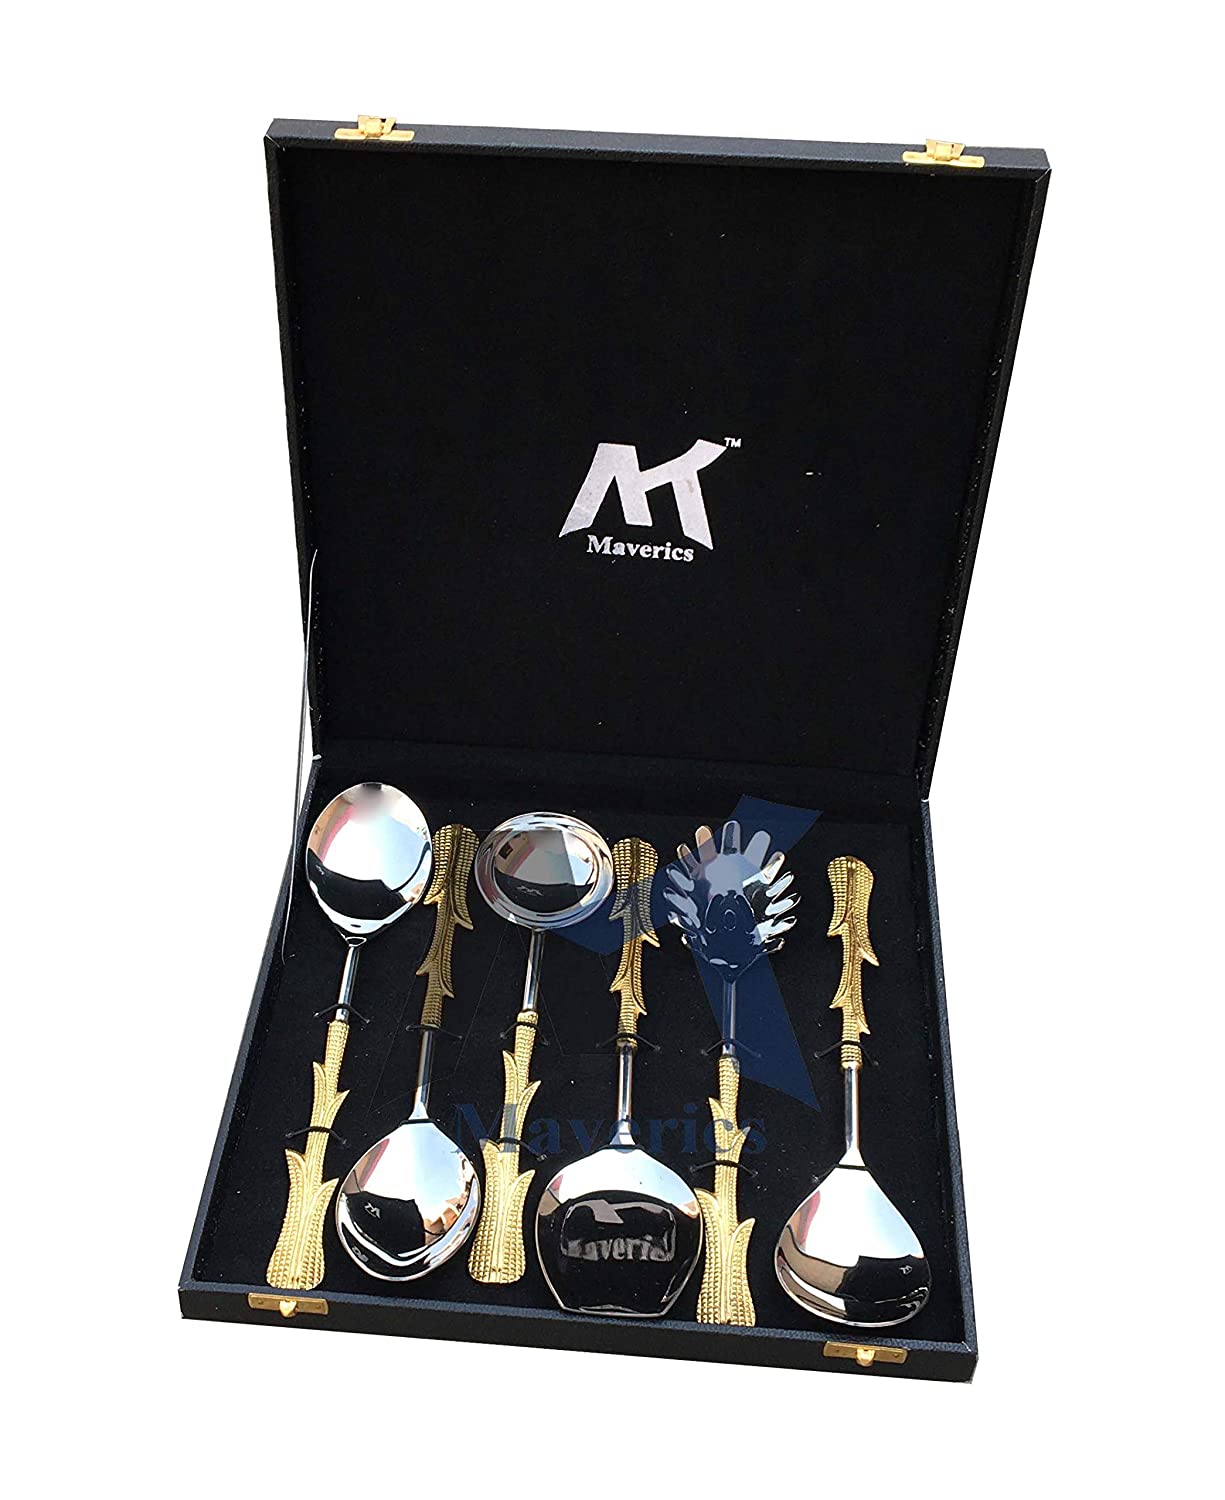 Maverics Gold Polished Classique Serves Designer Serving Spoon Set Gift Box | Flatware Cutlery with Multi Leaves Handle Design | Made with Brass | Set of 6